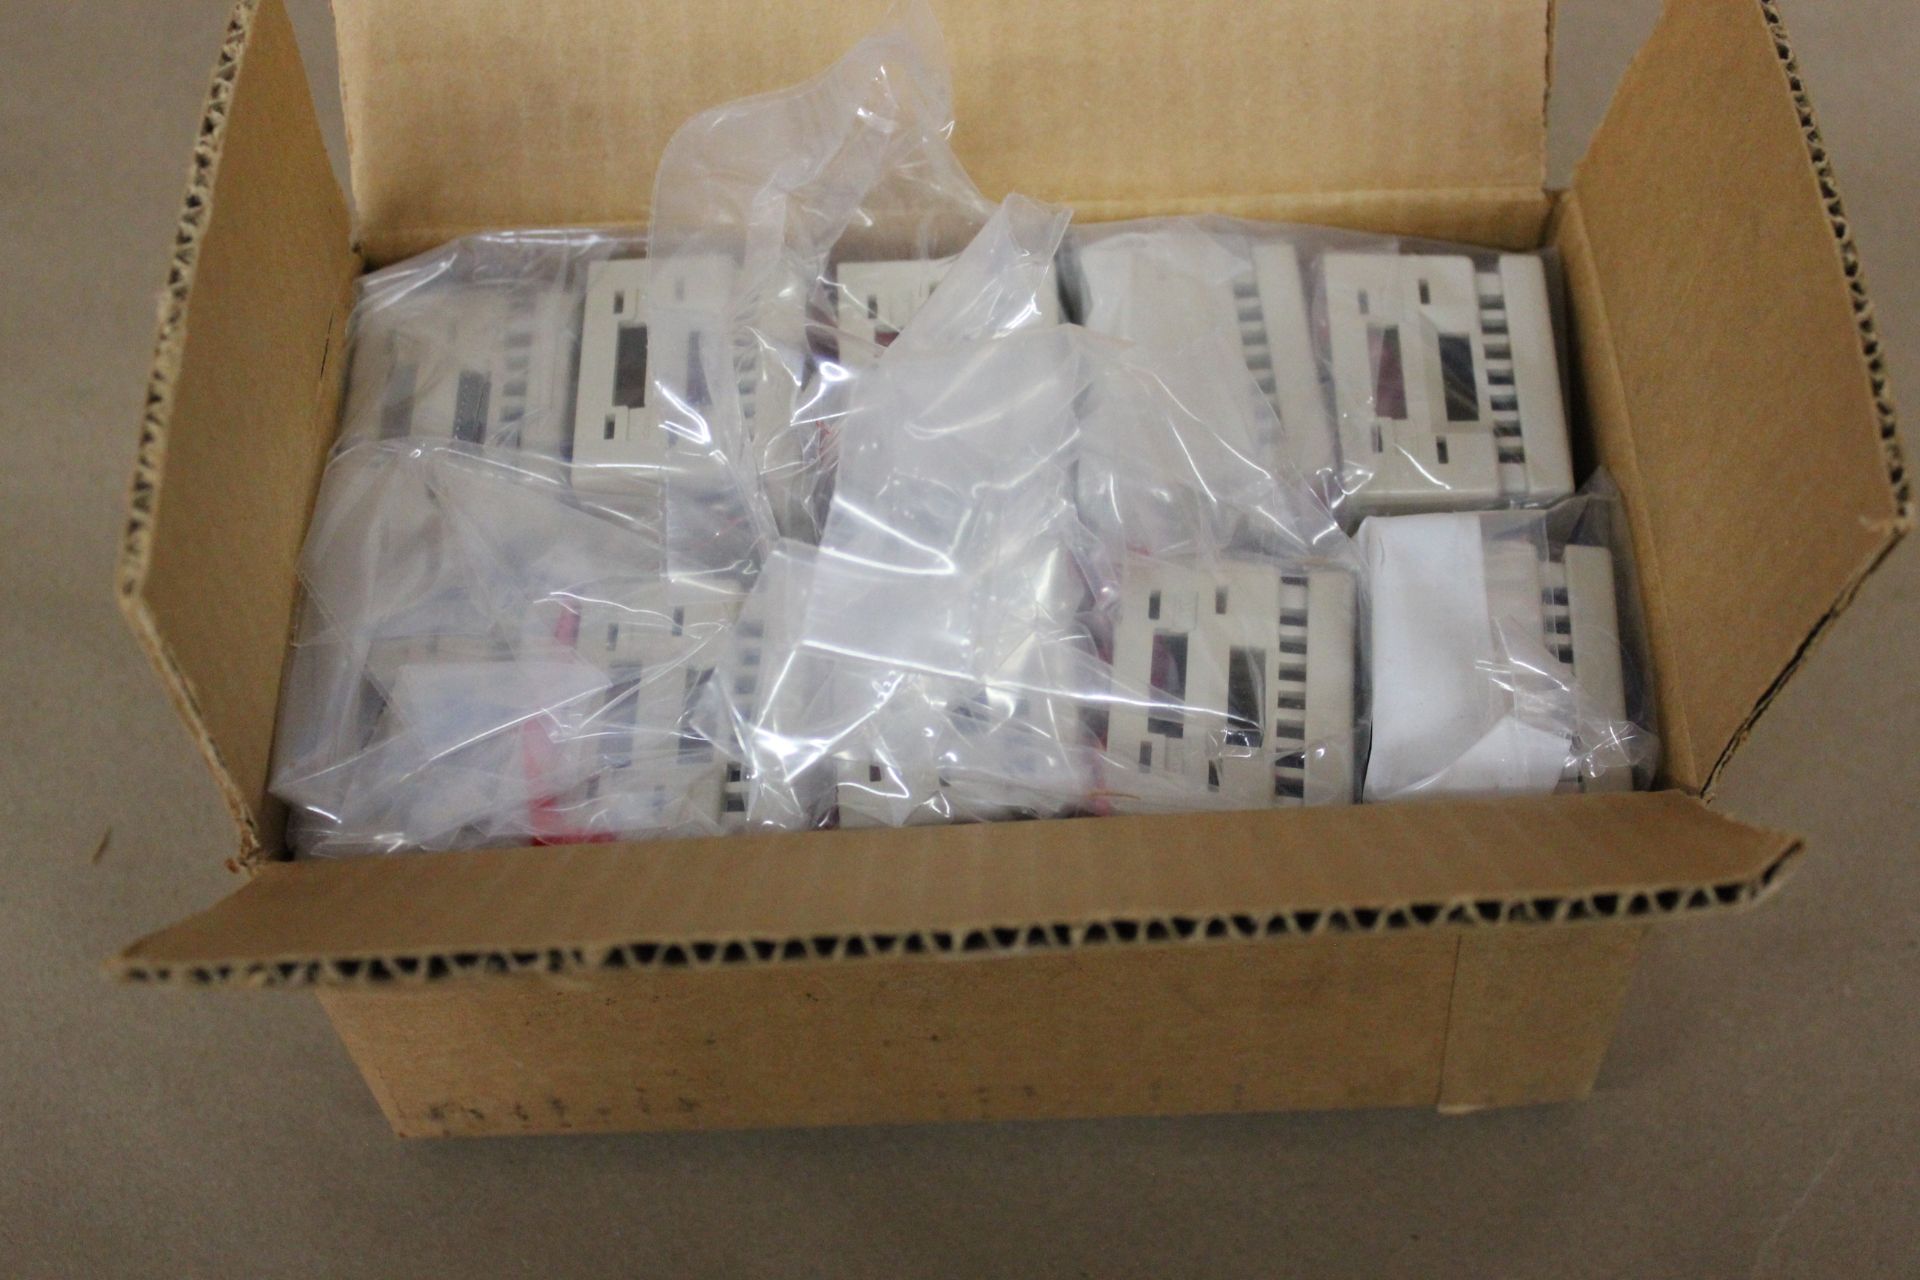 LOT OF NEW HONEYWELL THERMOSTAT COVERS - Image 3 of 5